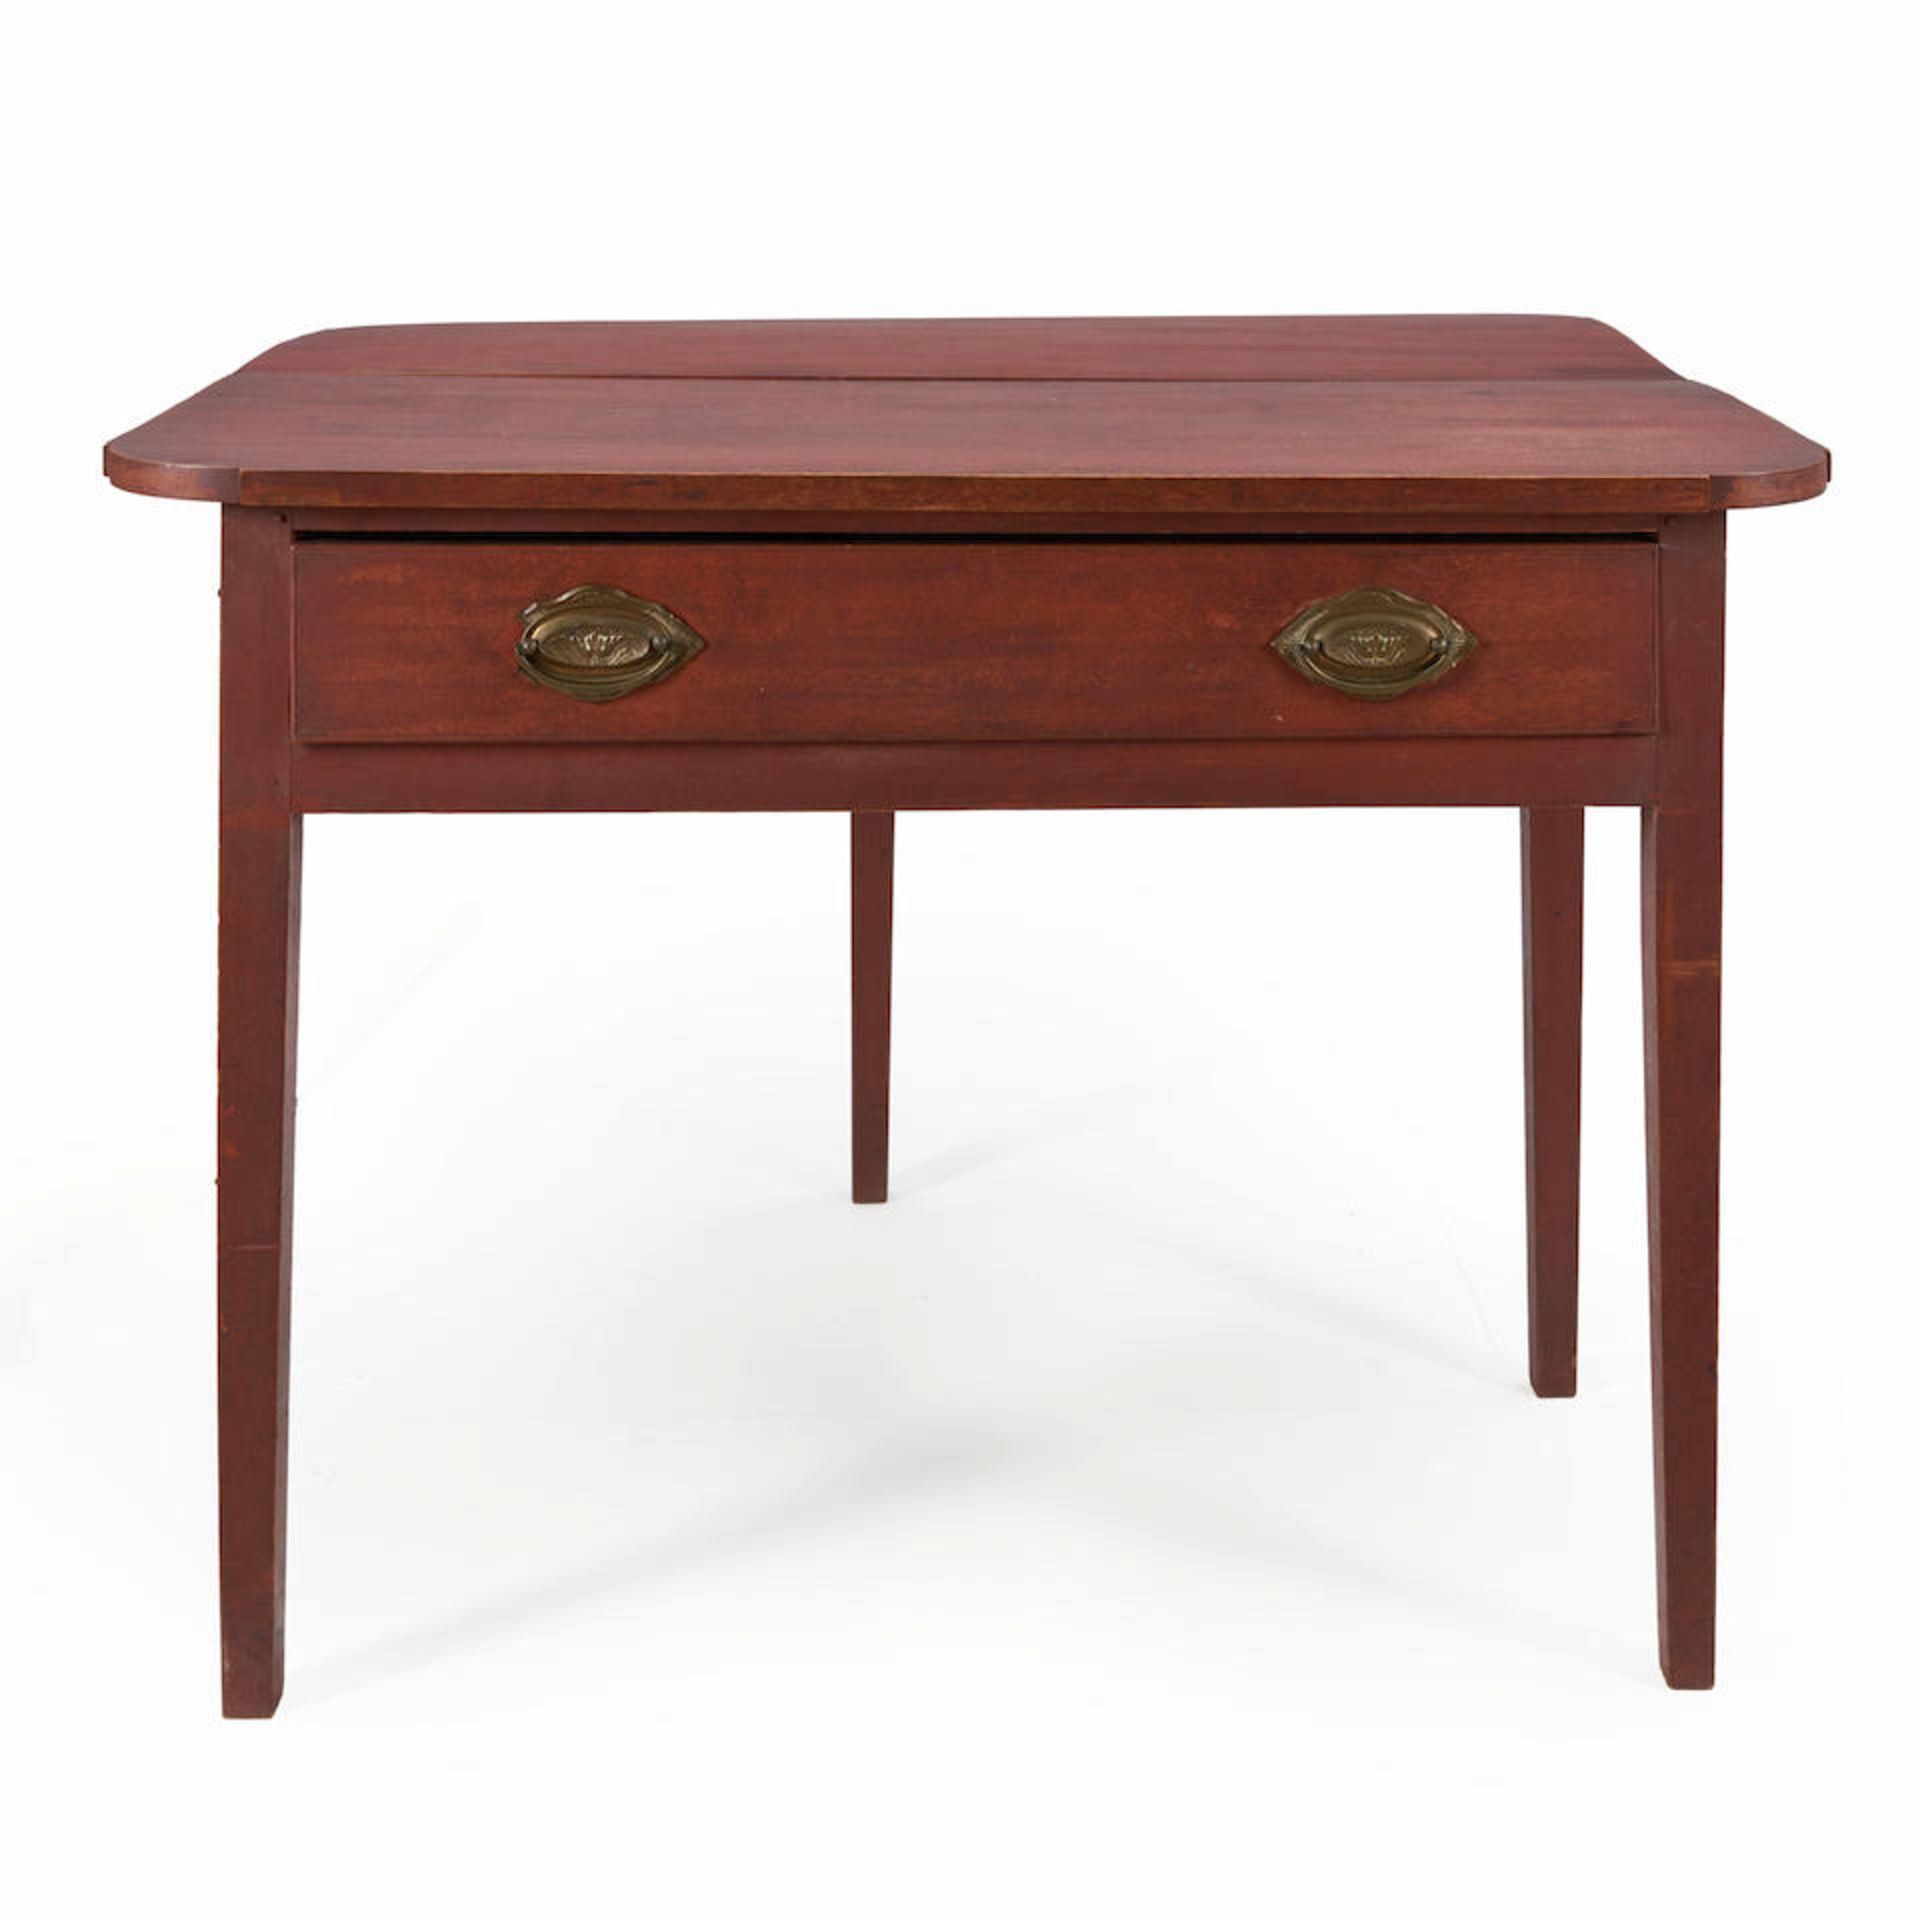 COUNTRY RED-PAINTED CARD TABLE - Image 2 of 4